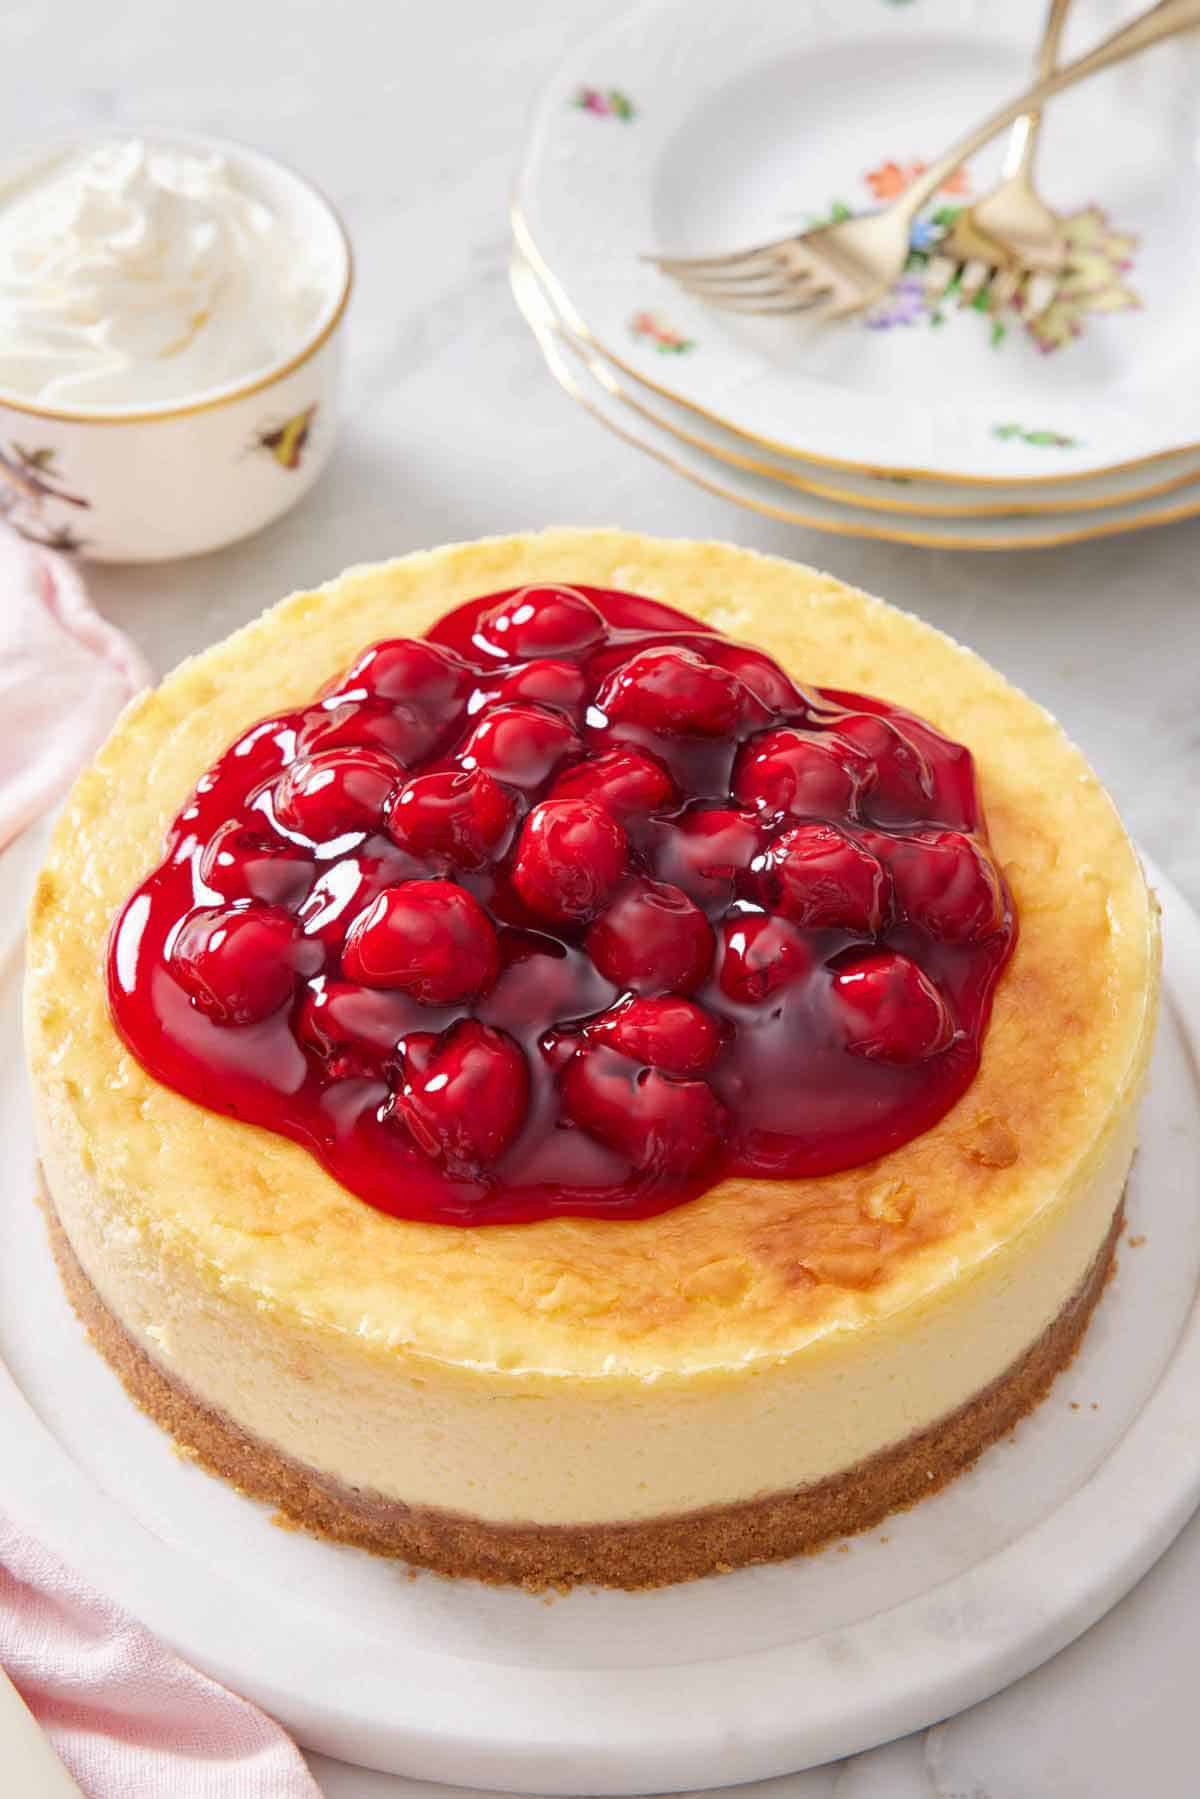 An air fryer cheesecake with cherry sauce on top. Stack of plates and forks in the background along with some whipped cream.